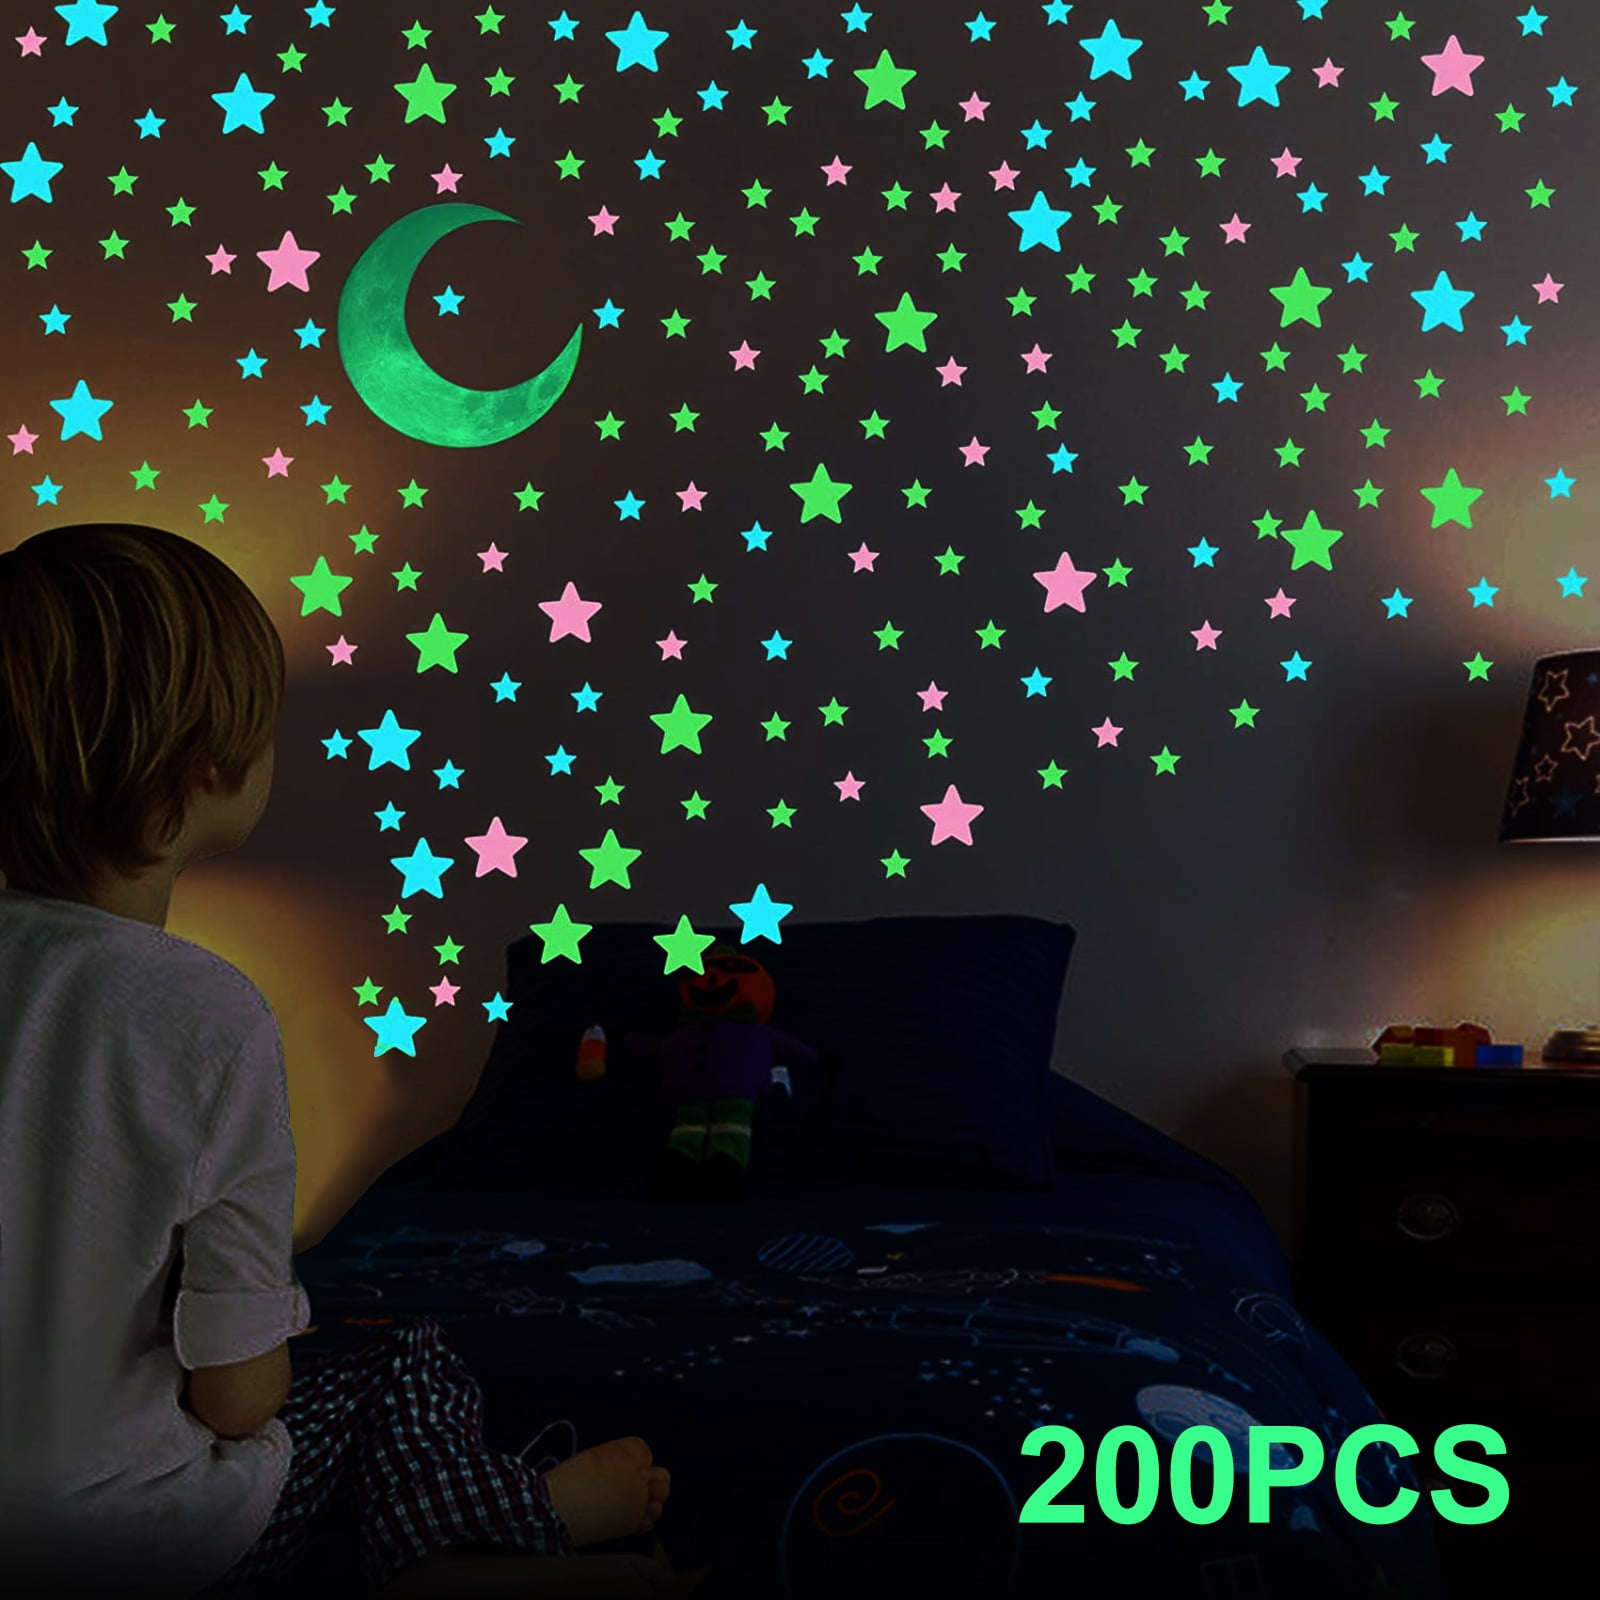 Details about   438pcs Glow In The Dark Luminous Starry Sky Stars Moon Planet Space Wall Sticker 